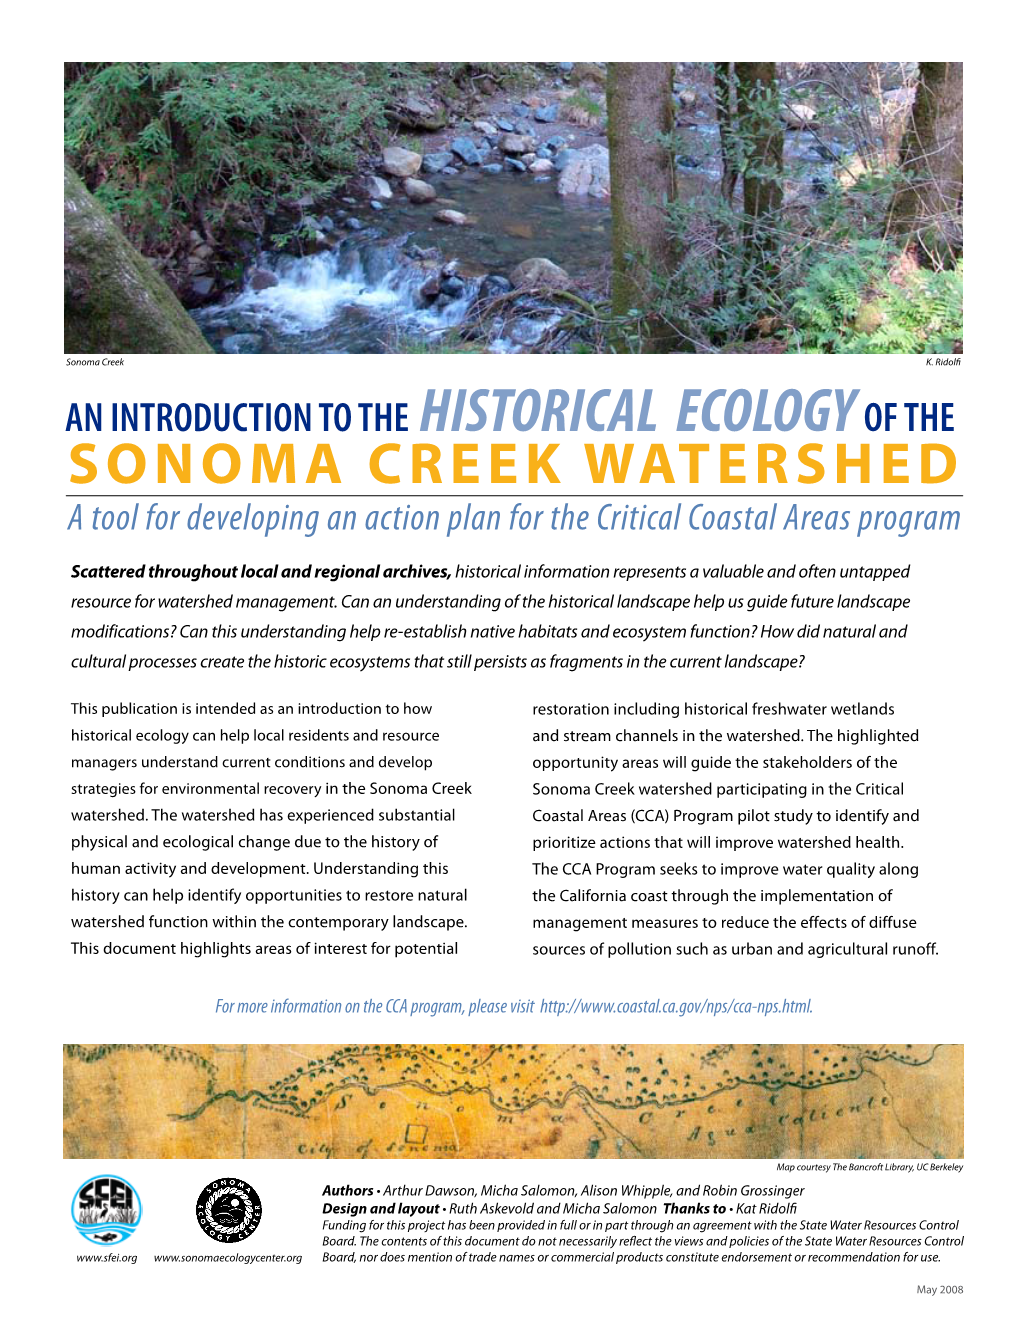 AN INTRODUCTION to the HISTORICAL ECOLOGY of the SONOMA CREEK WATERSHED a Tool for Developing an Action Plan for the Critical Coastal Areas Program